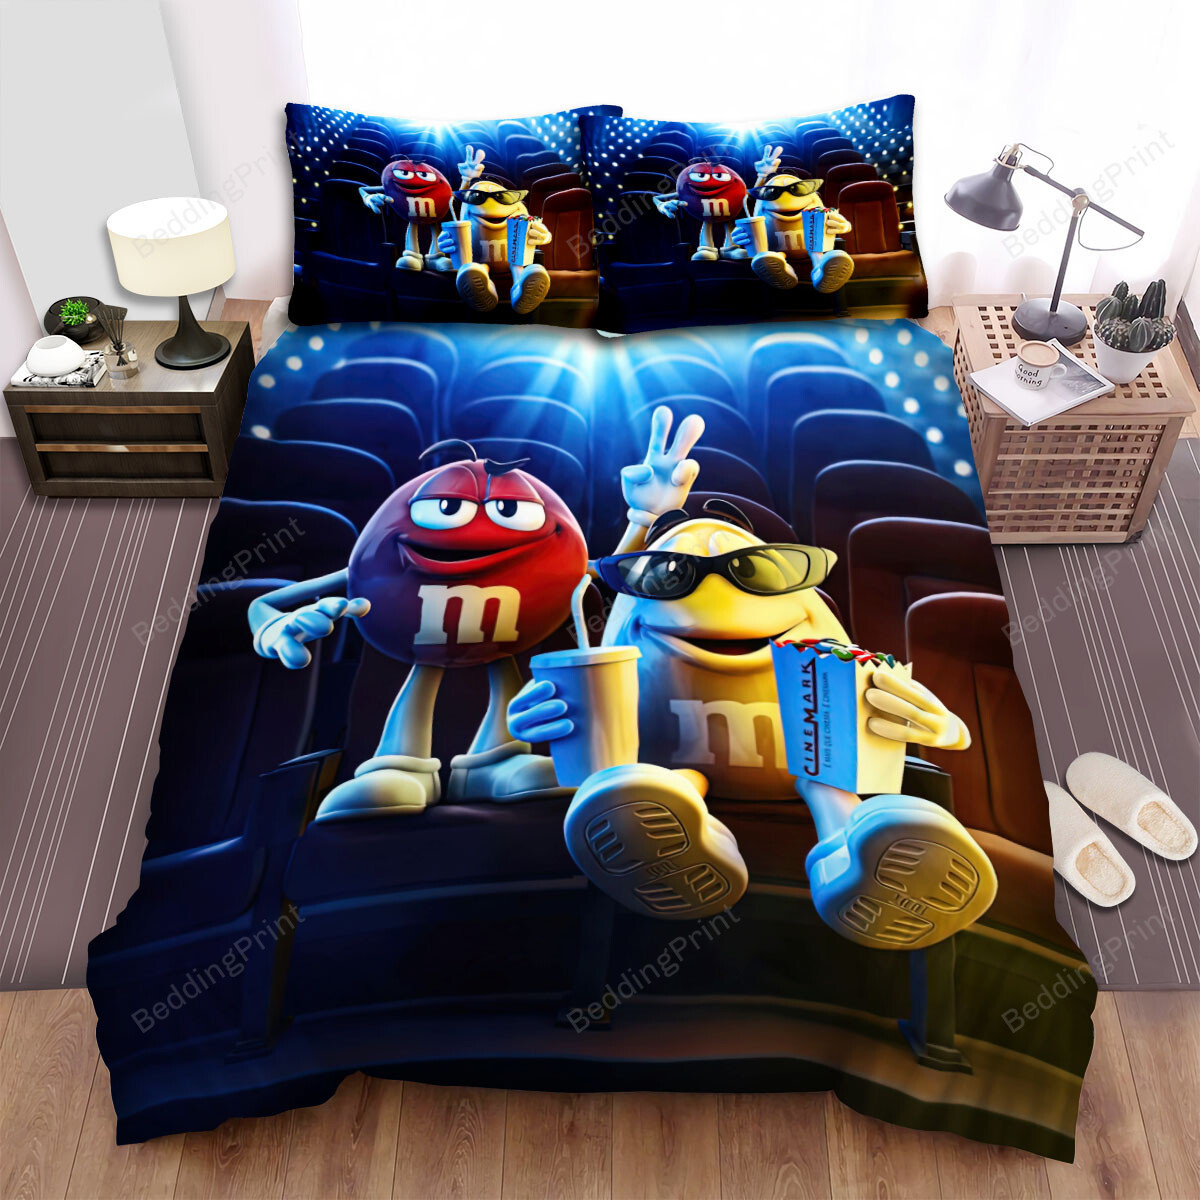 M&ampM’s Red & Yellow In Movie Theater Bed Sheets Spread Duvet Cover Bedding Sets